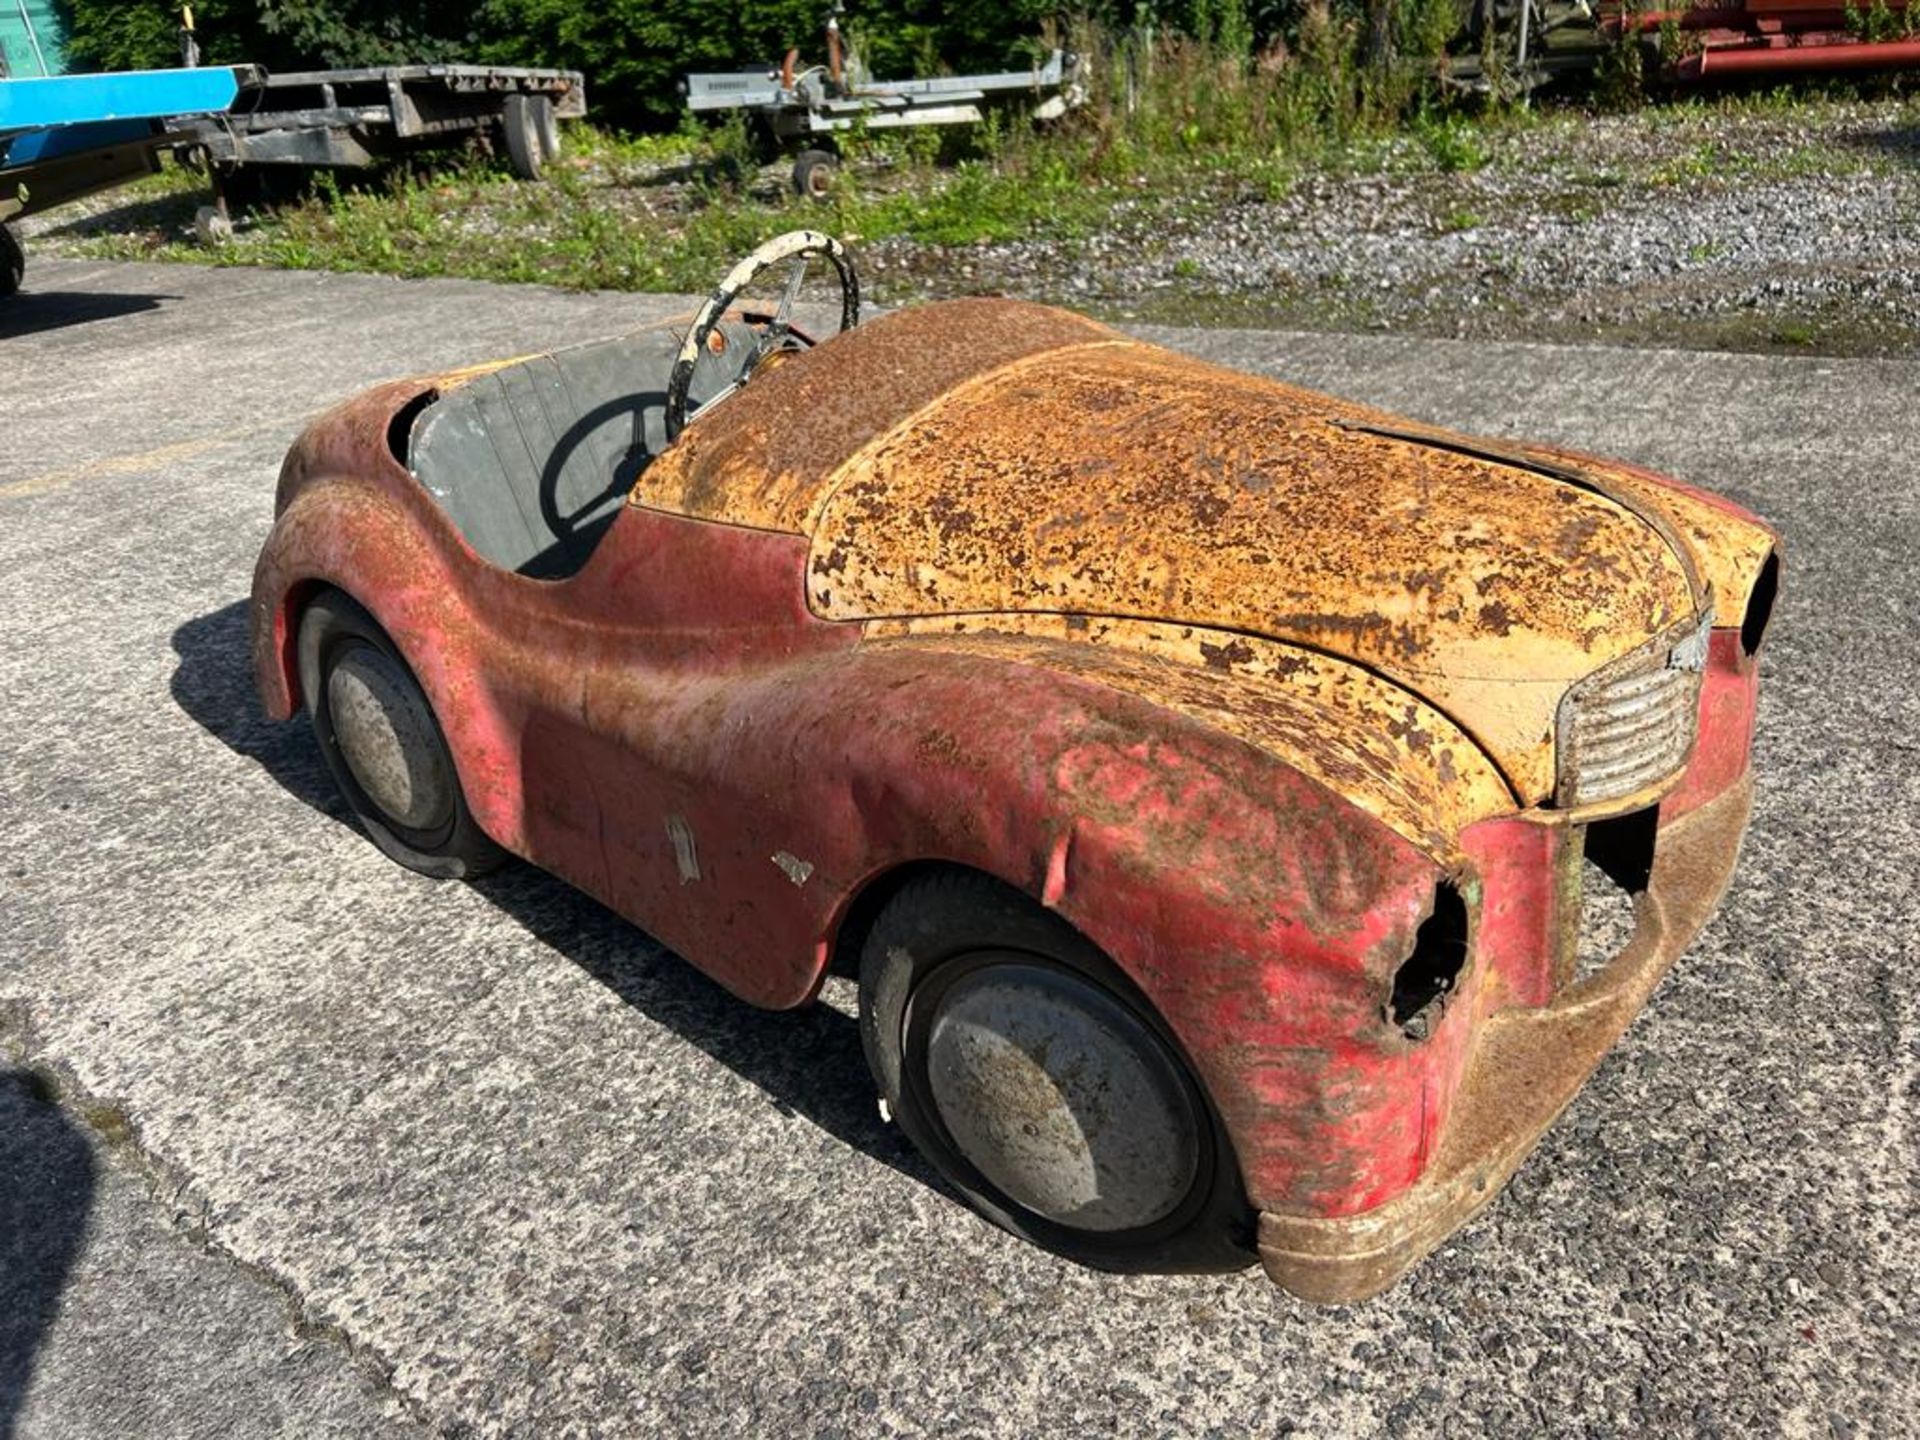 A vintage Austin J40 pedal car in barn find condition. - Image 3 of 12